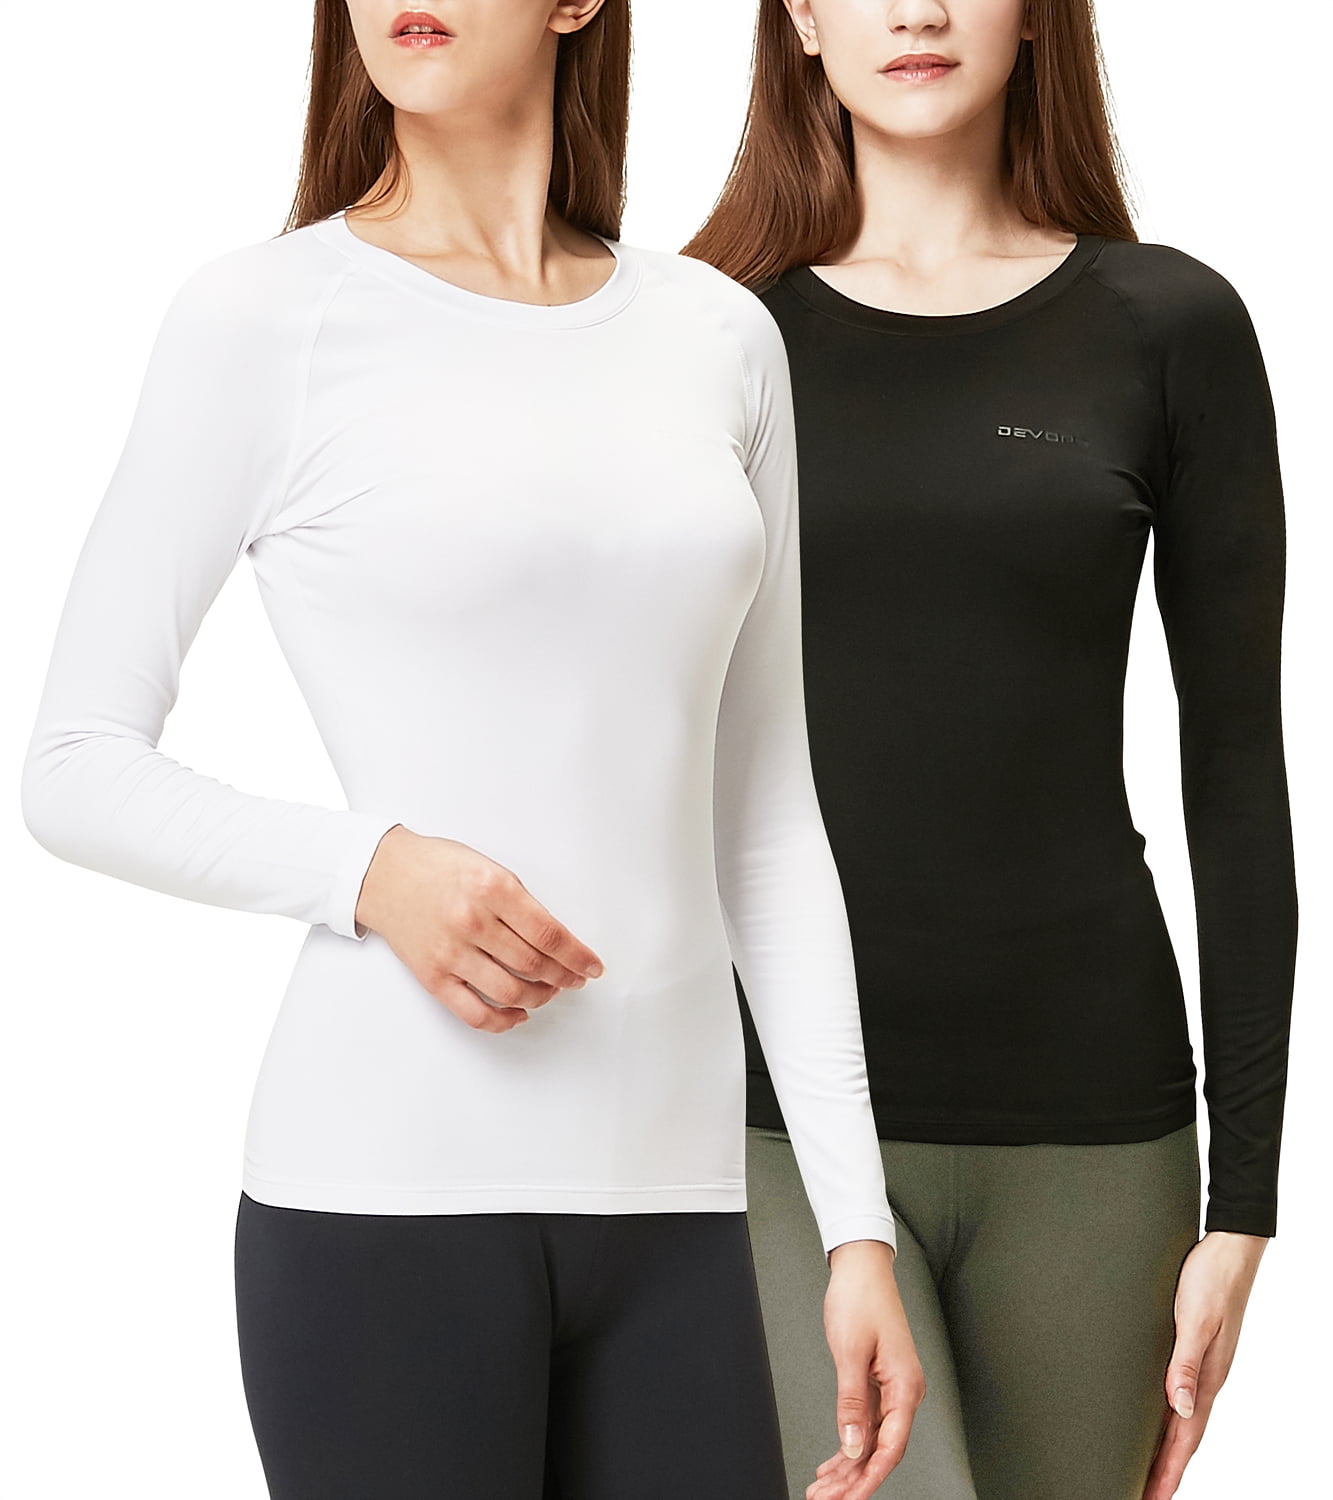 DEVOPS 2 Pack Women's Long sleeve compression Winter tops thermal ...